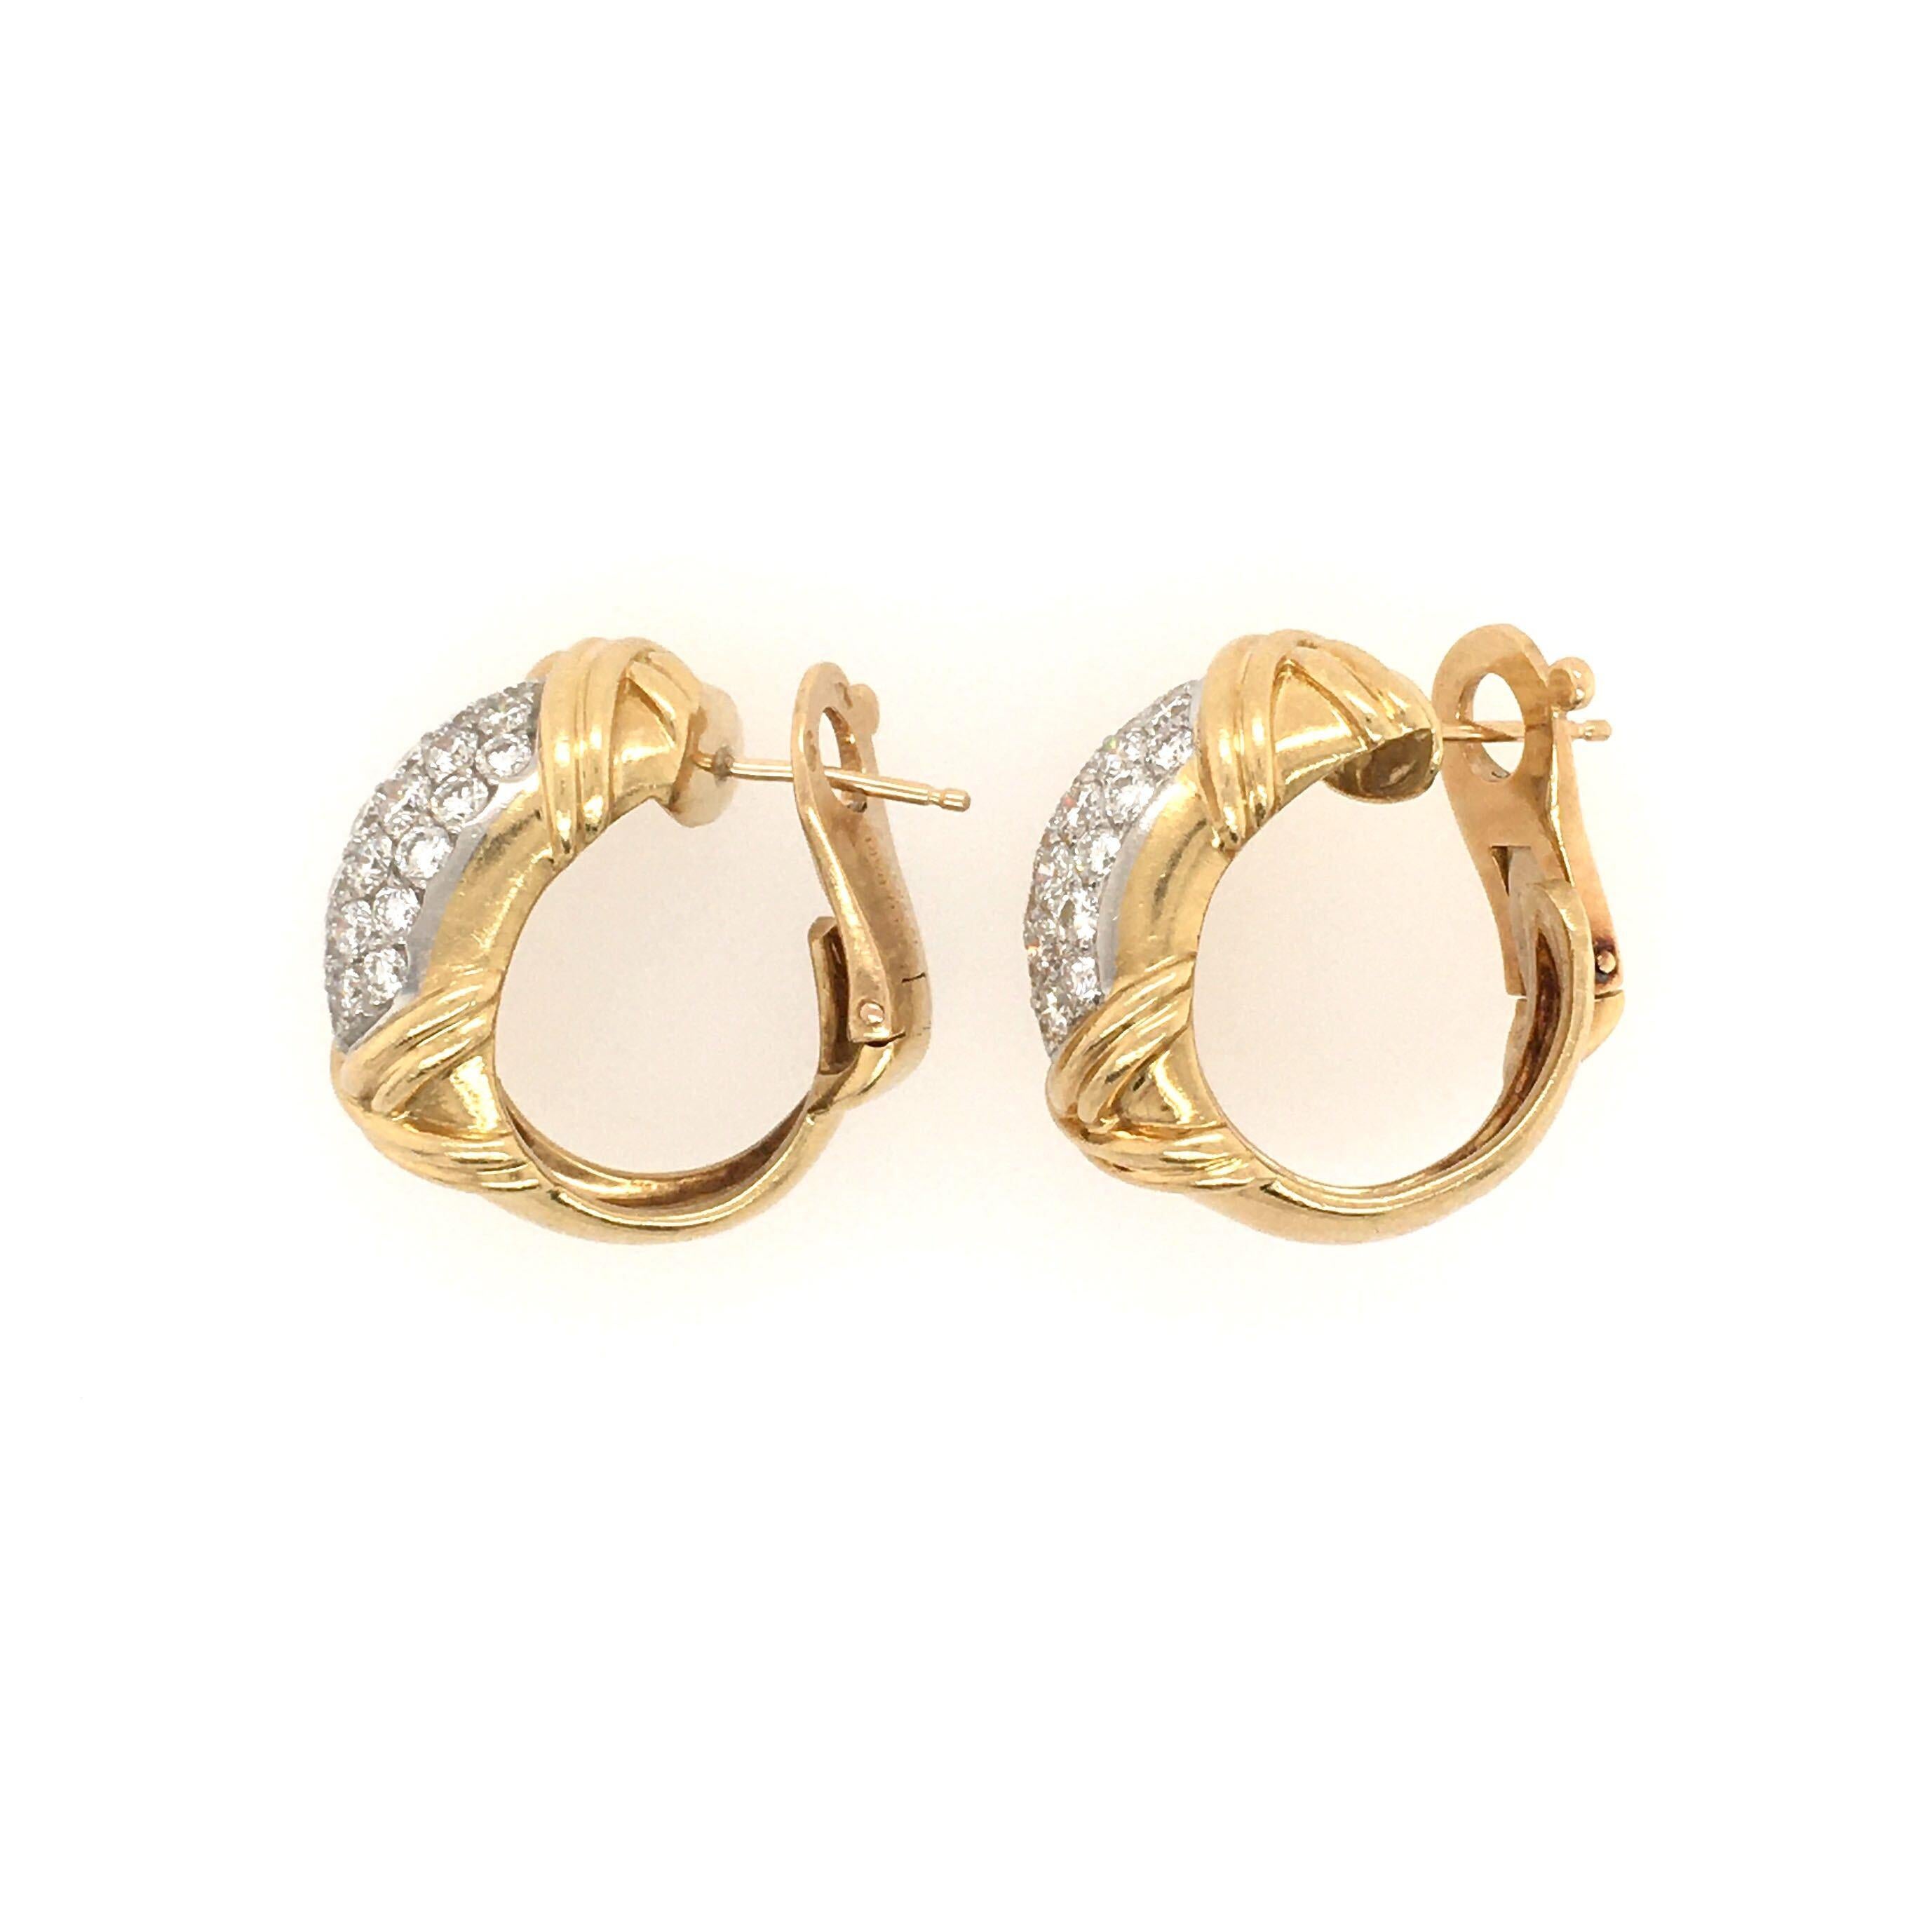 A pair of 18 karat yellow gold and diamond earrings. Fred. Paris. Designed as a hoop, enhanced by pave set diamonds and X motifs. Fifty eight (58) diamonds weigh approximately 2.90 carats. Length is approximately 7/8 inch. Gross weight is